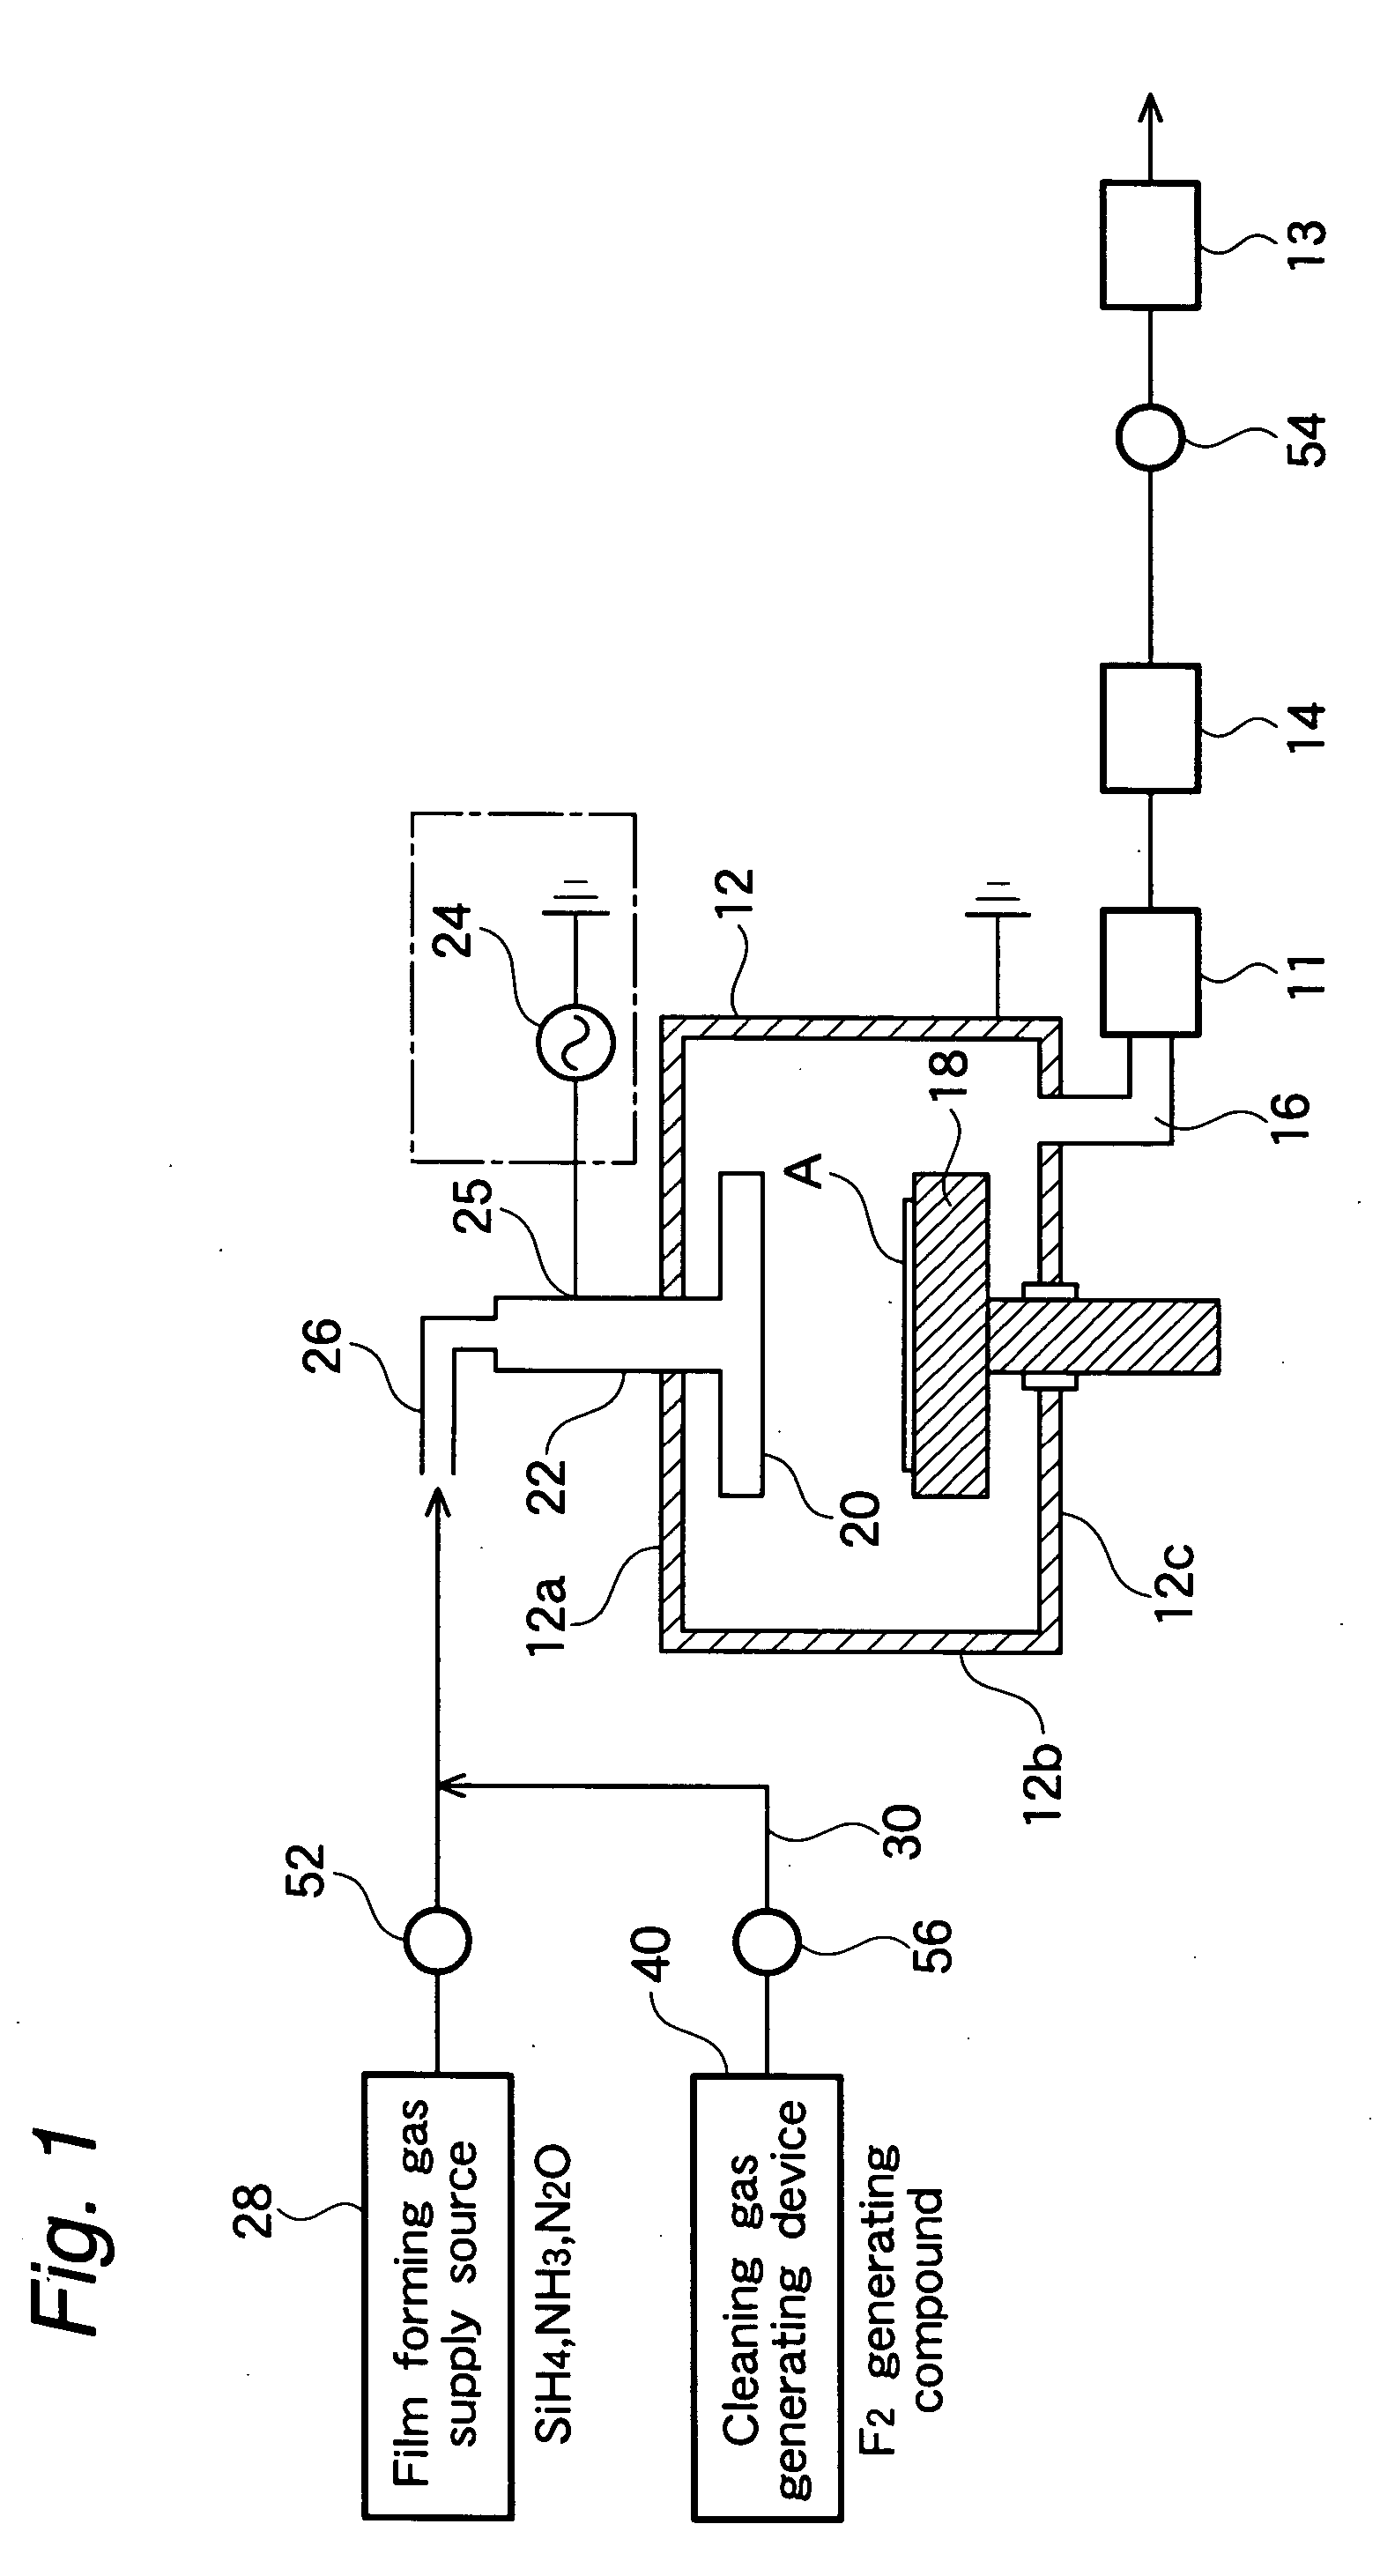 Cvd apparatus having means for cleaning with fluorine gas and method of cleaning cvd apparatus with fluorine gas